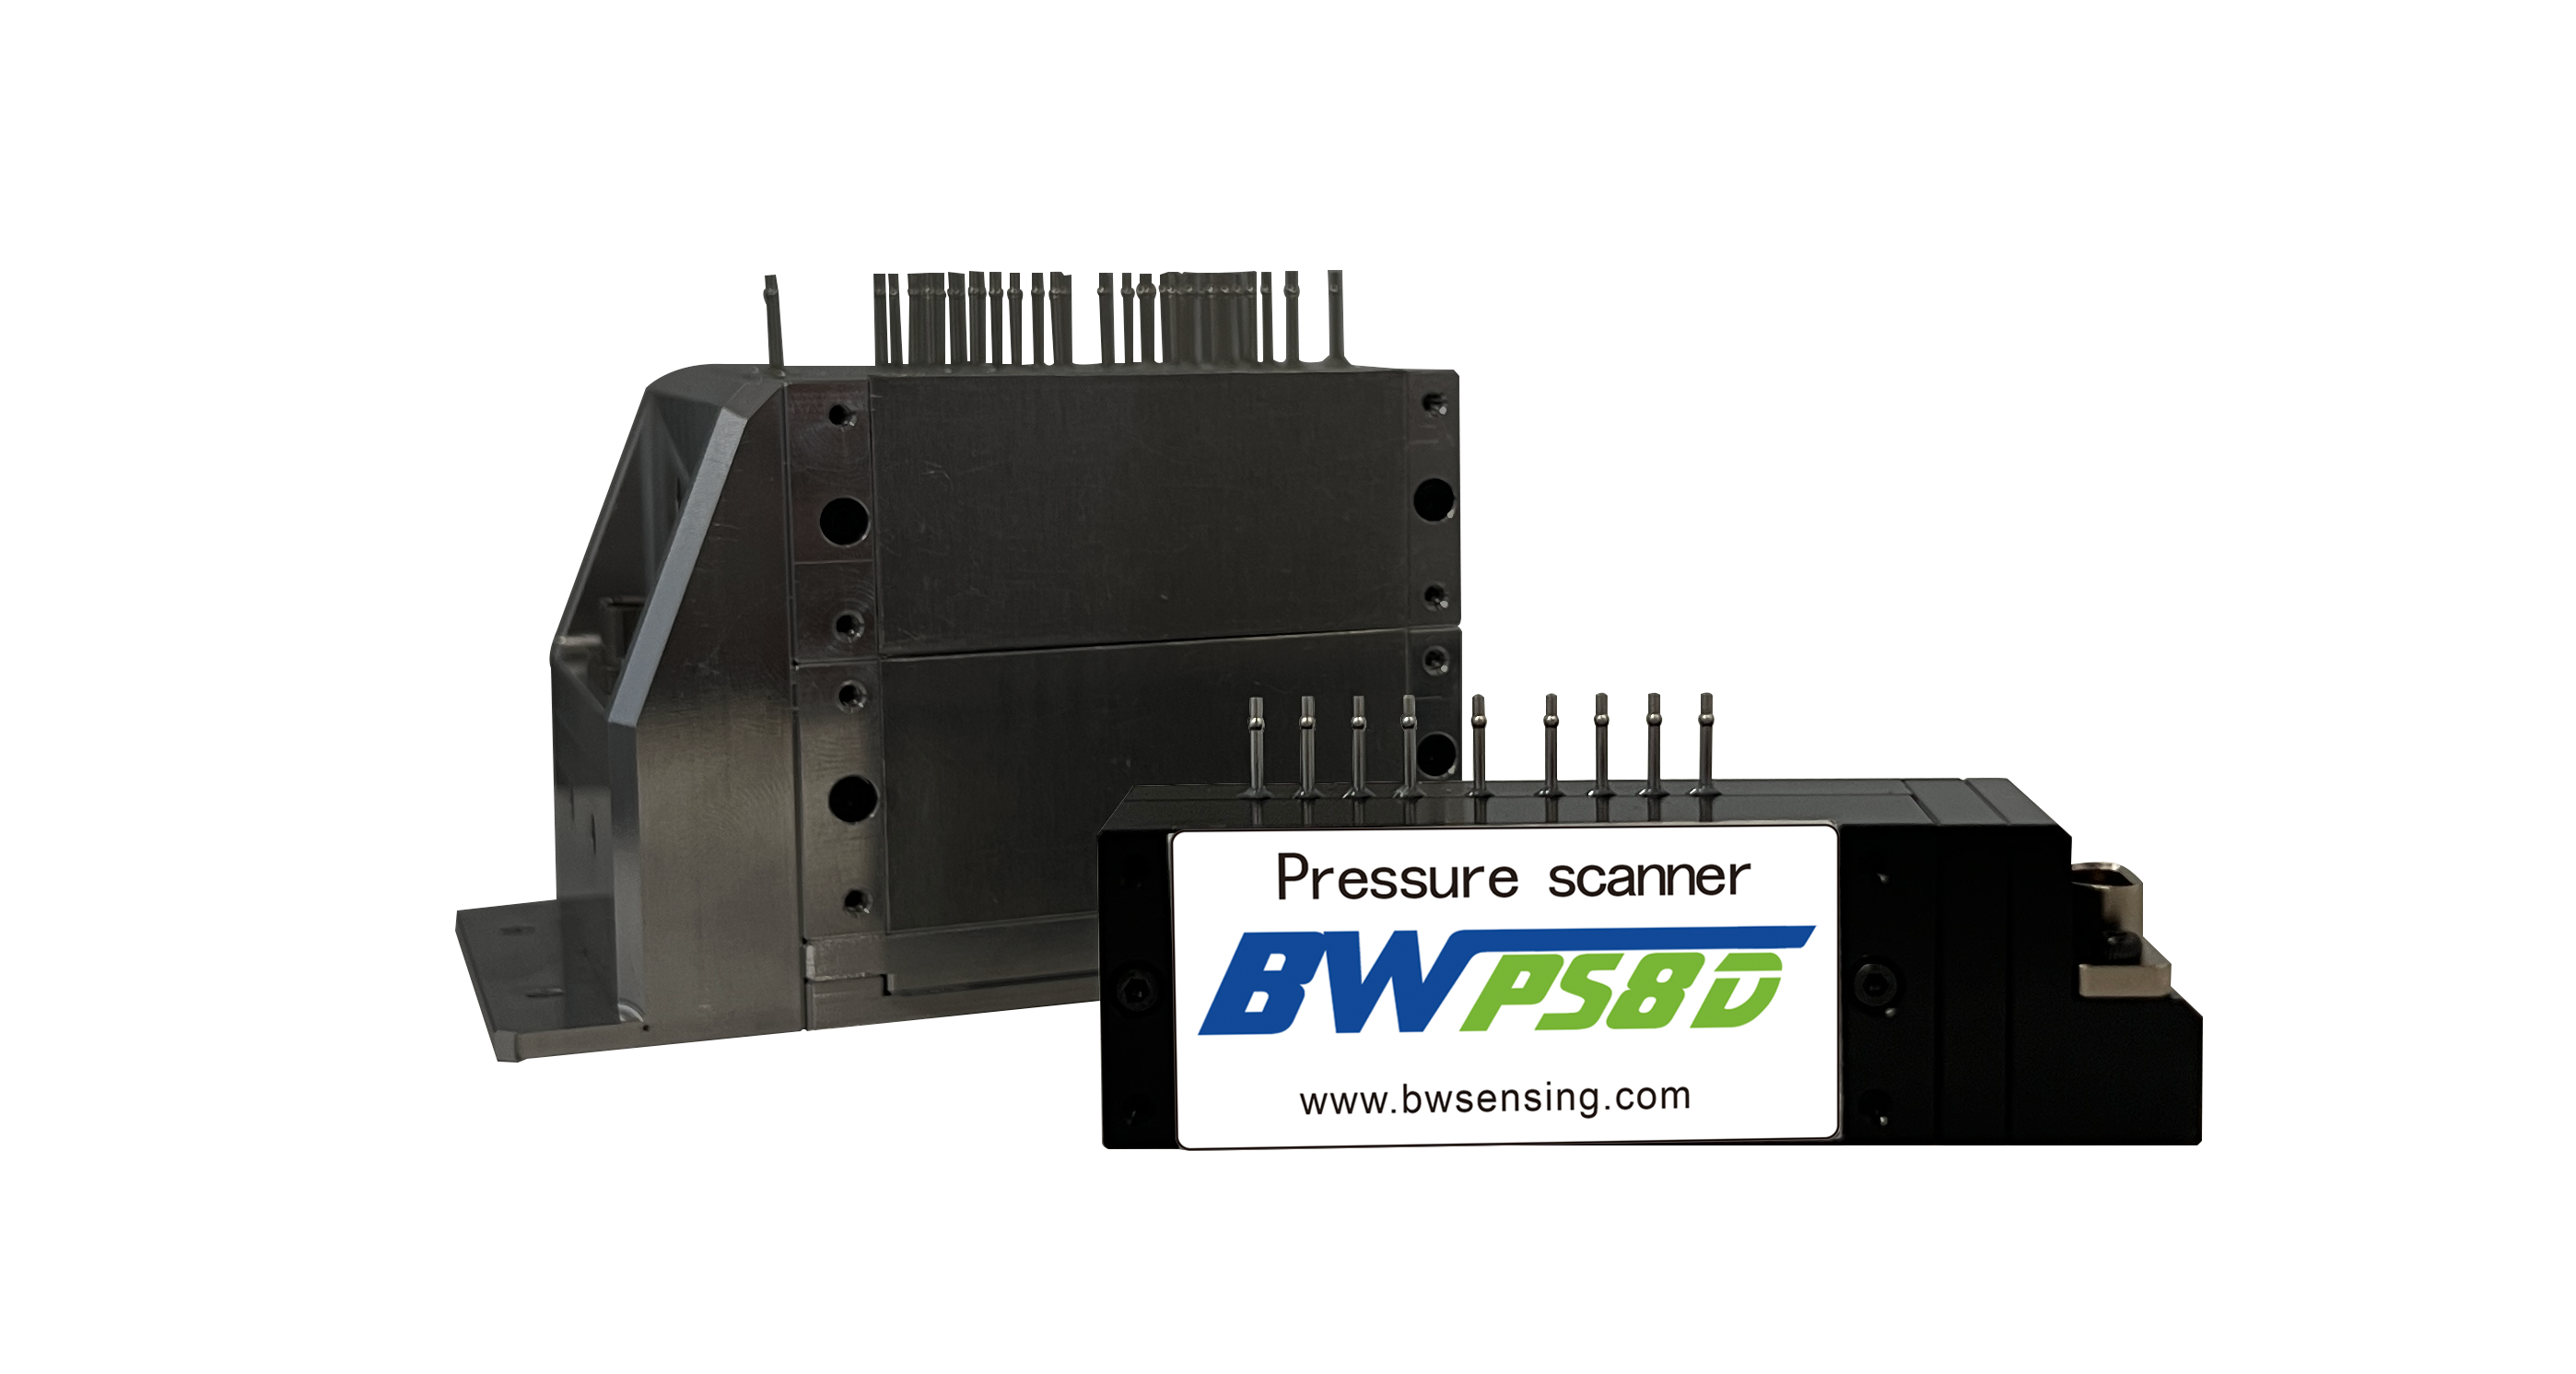 BW-PS8D Series 8 channel high precision Pressure Scanning Valve